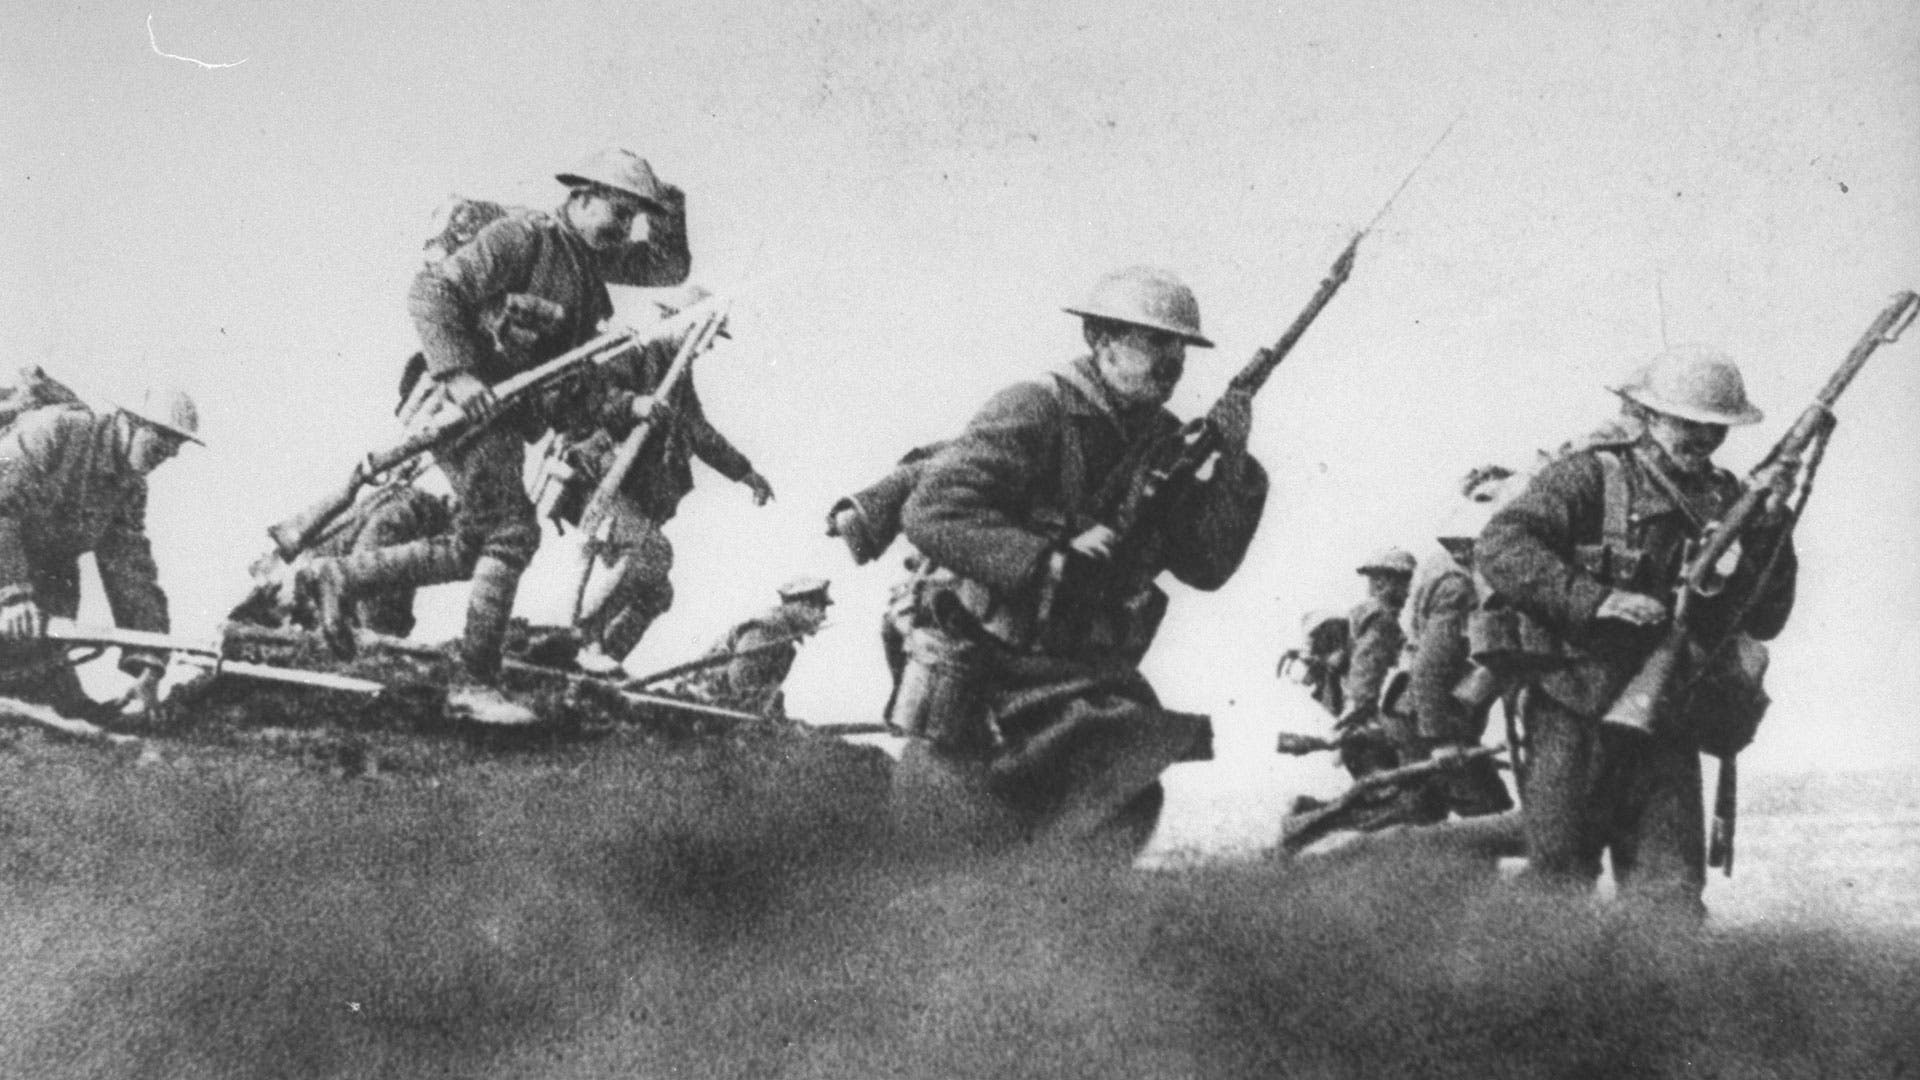 HISTORY: The Battle of the Somme